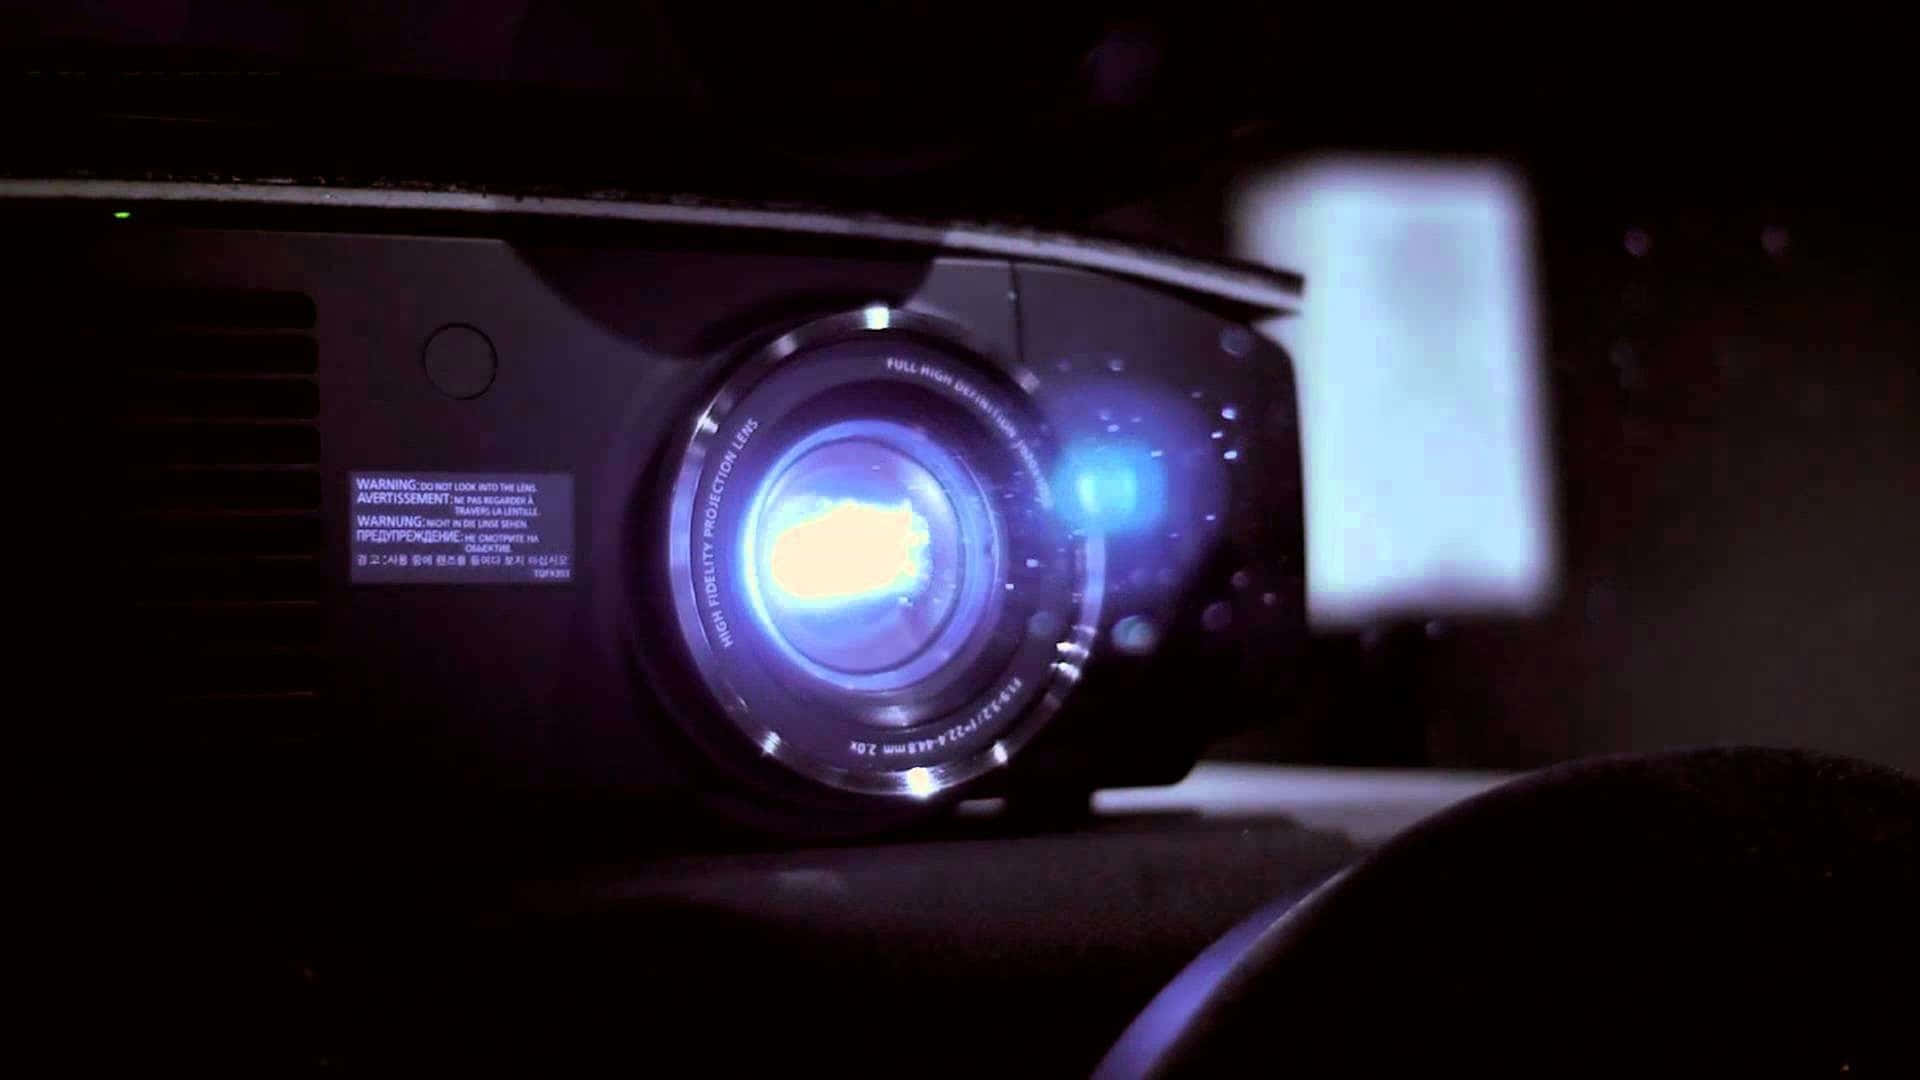 A 4K projector displaying crystal-clear image on a screen Wallpaper